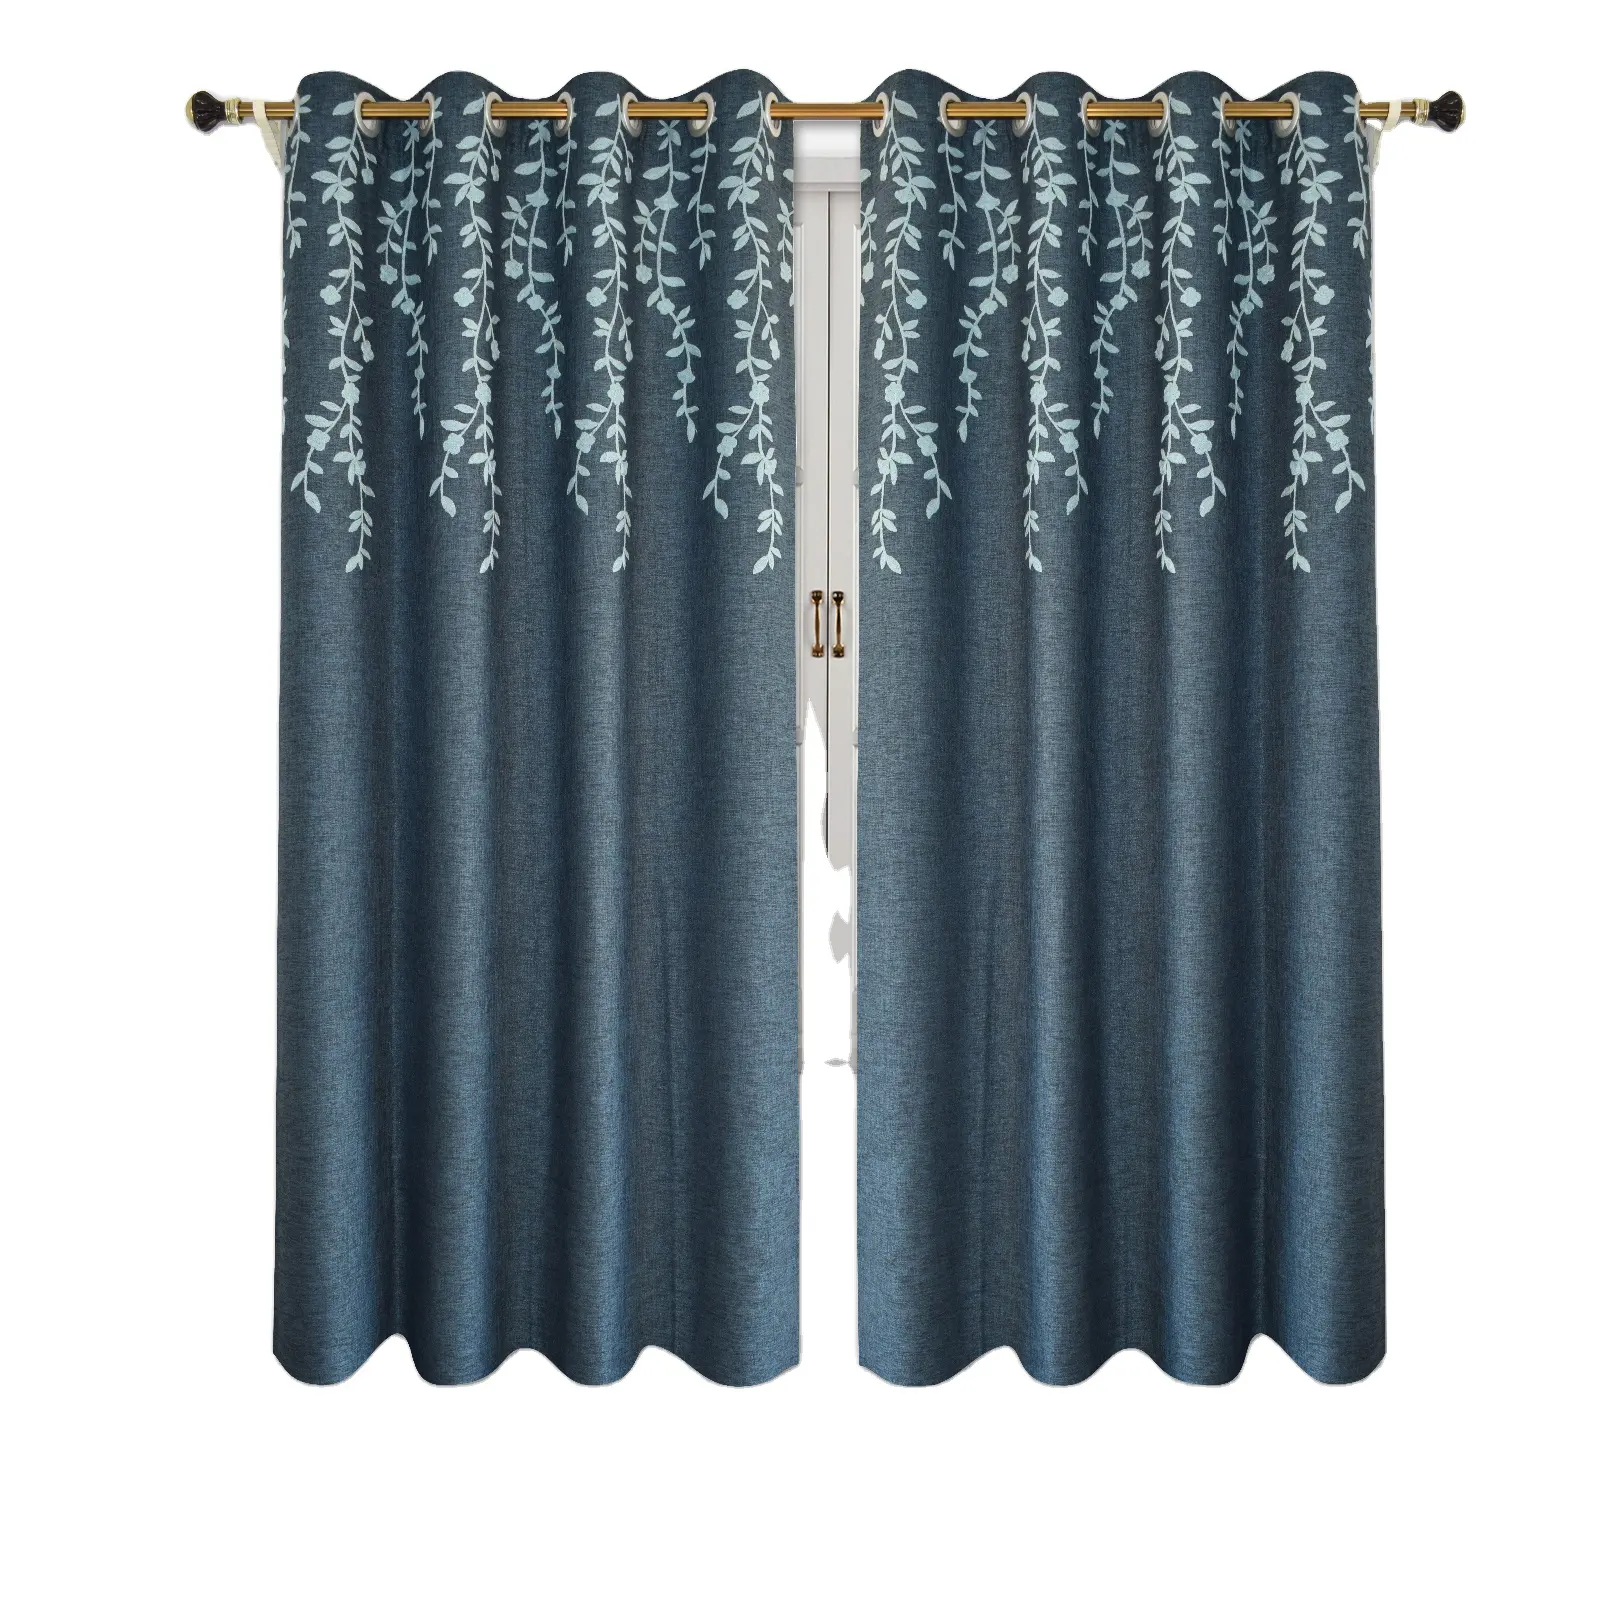 Light luxury Nordic style linen embroidery simple modern living room bedroom full shade curtain